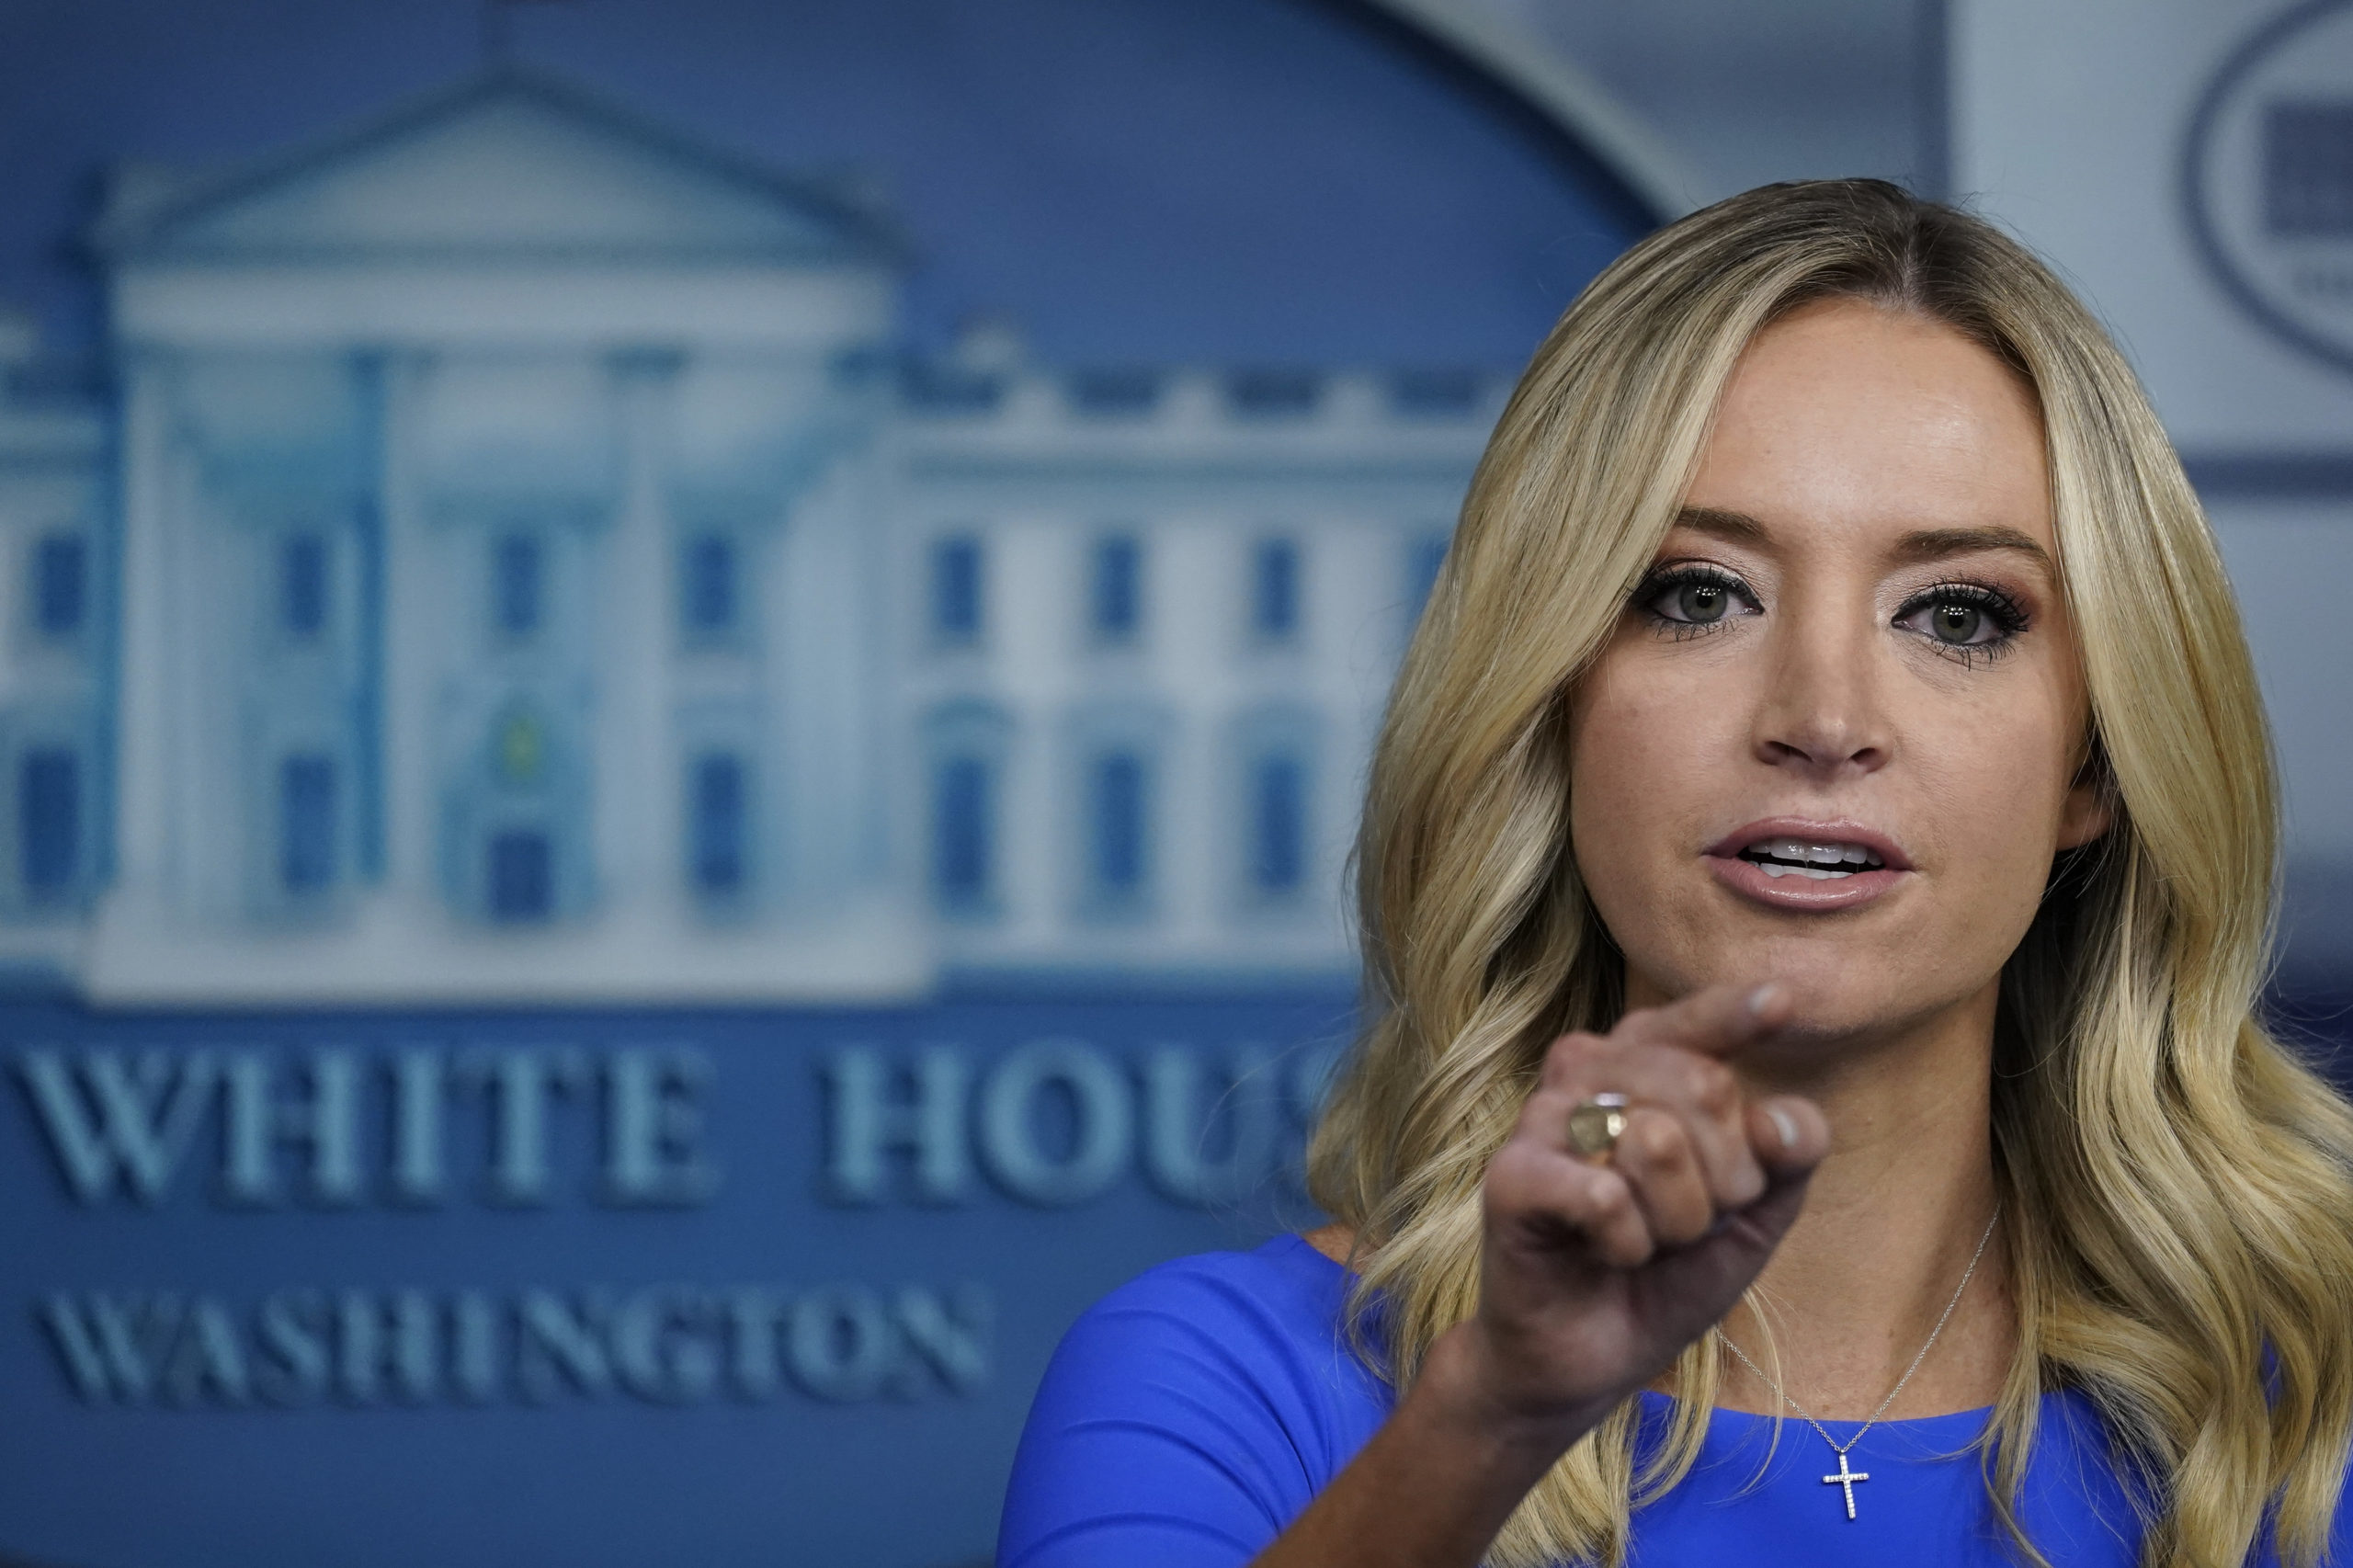 WASHINGTON, DC - OCTOBER 01: U.S. White House Press Secretary Kayleigh McEnany speaks during a press briefing at the White House on October 1, 2020 in Washington, DC. President Donald Trump is traveling to Bedminster, New Jersey on Thursday for a roundtable event with supporters and a fundraiser. (Photo by Drew Angerer/Getty Images)